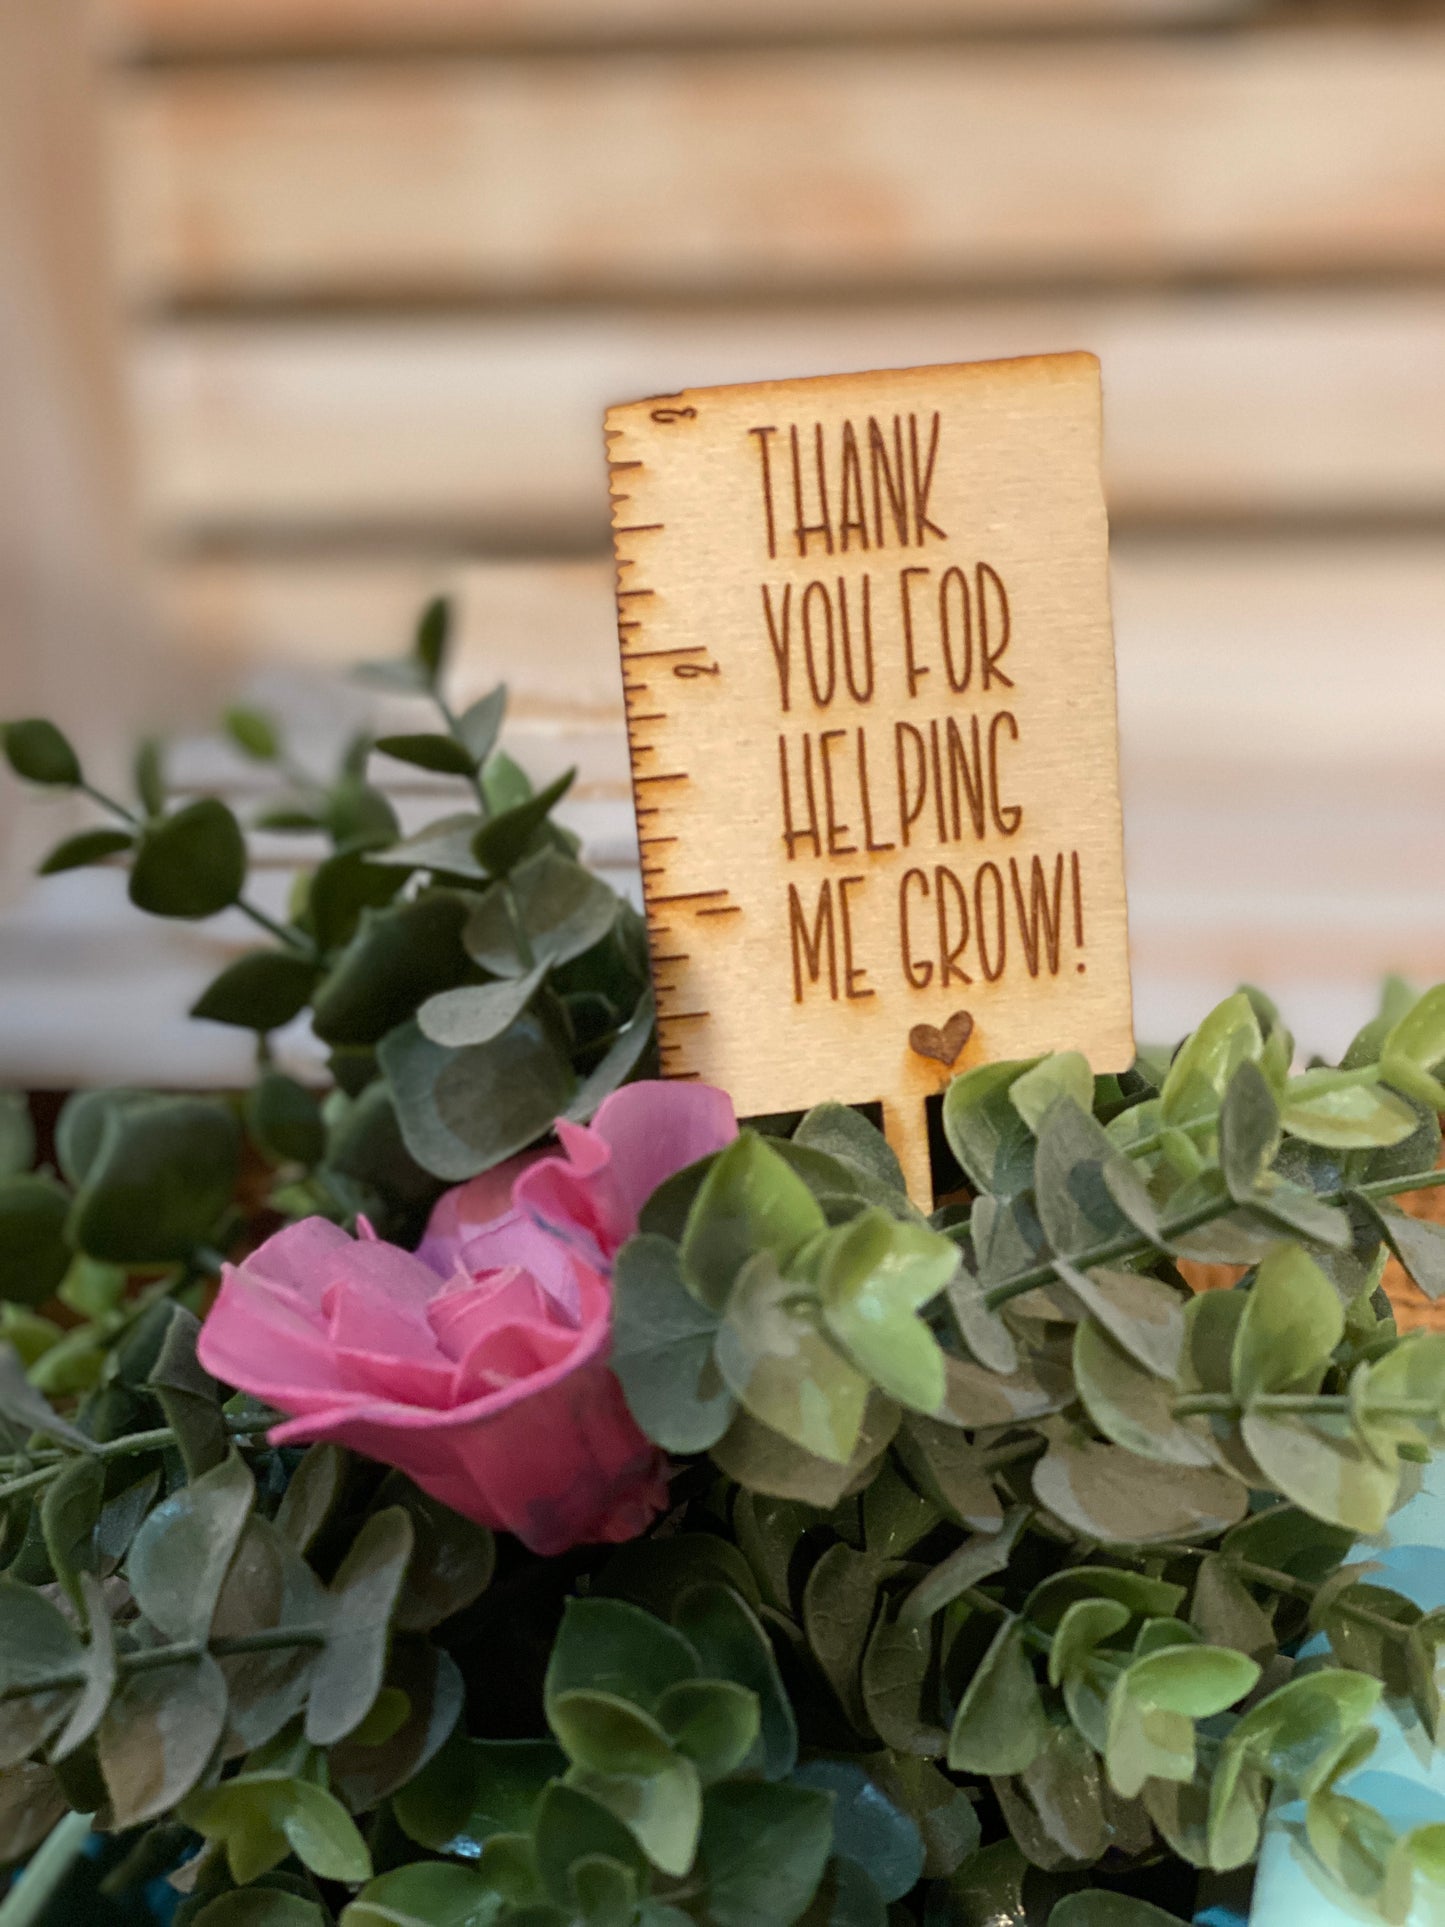 Thank you For Helping me Grow - Laser Cut Insert (approx 4" tall) - Paisley Grace Makery